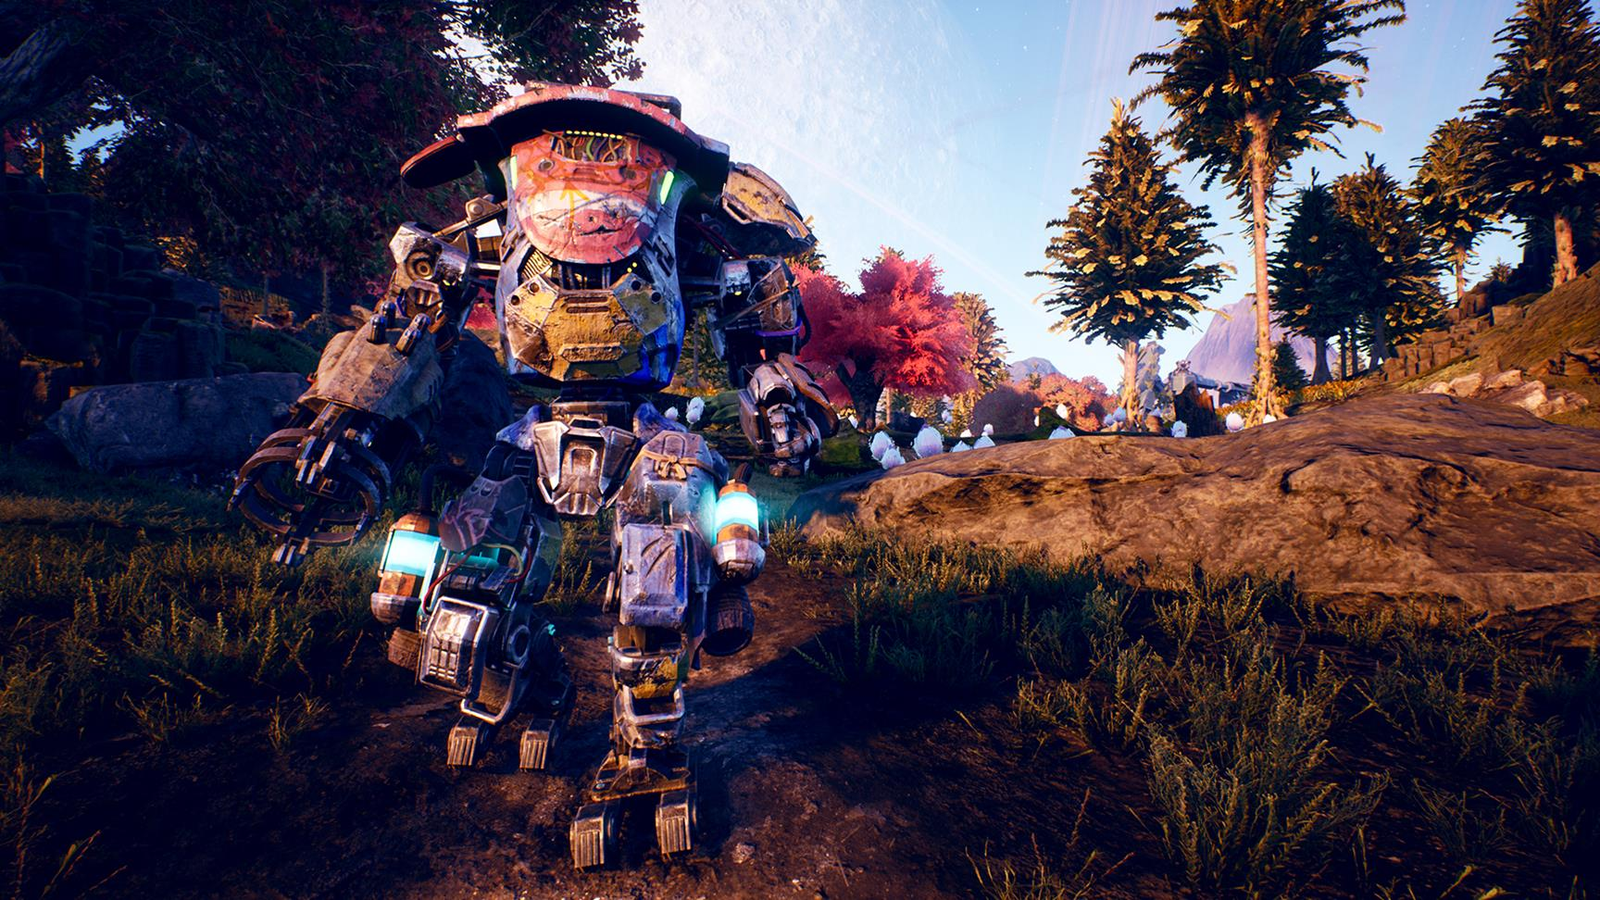 The Outer Worlds': An Anticapitalist Game That's Too Much Work